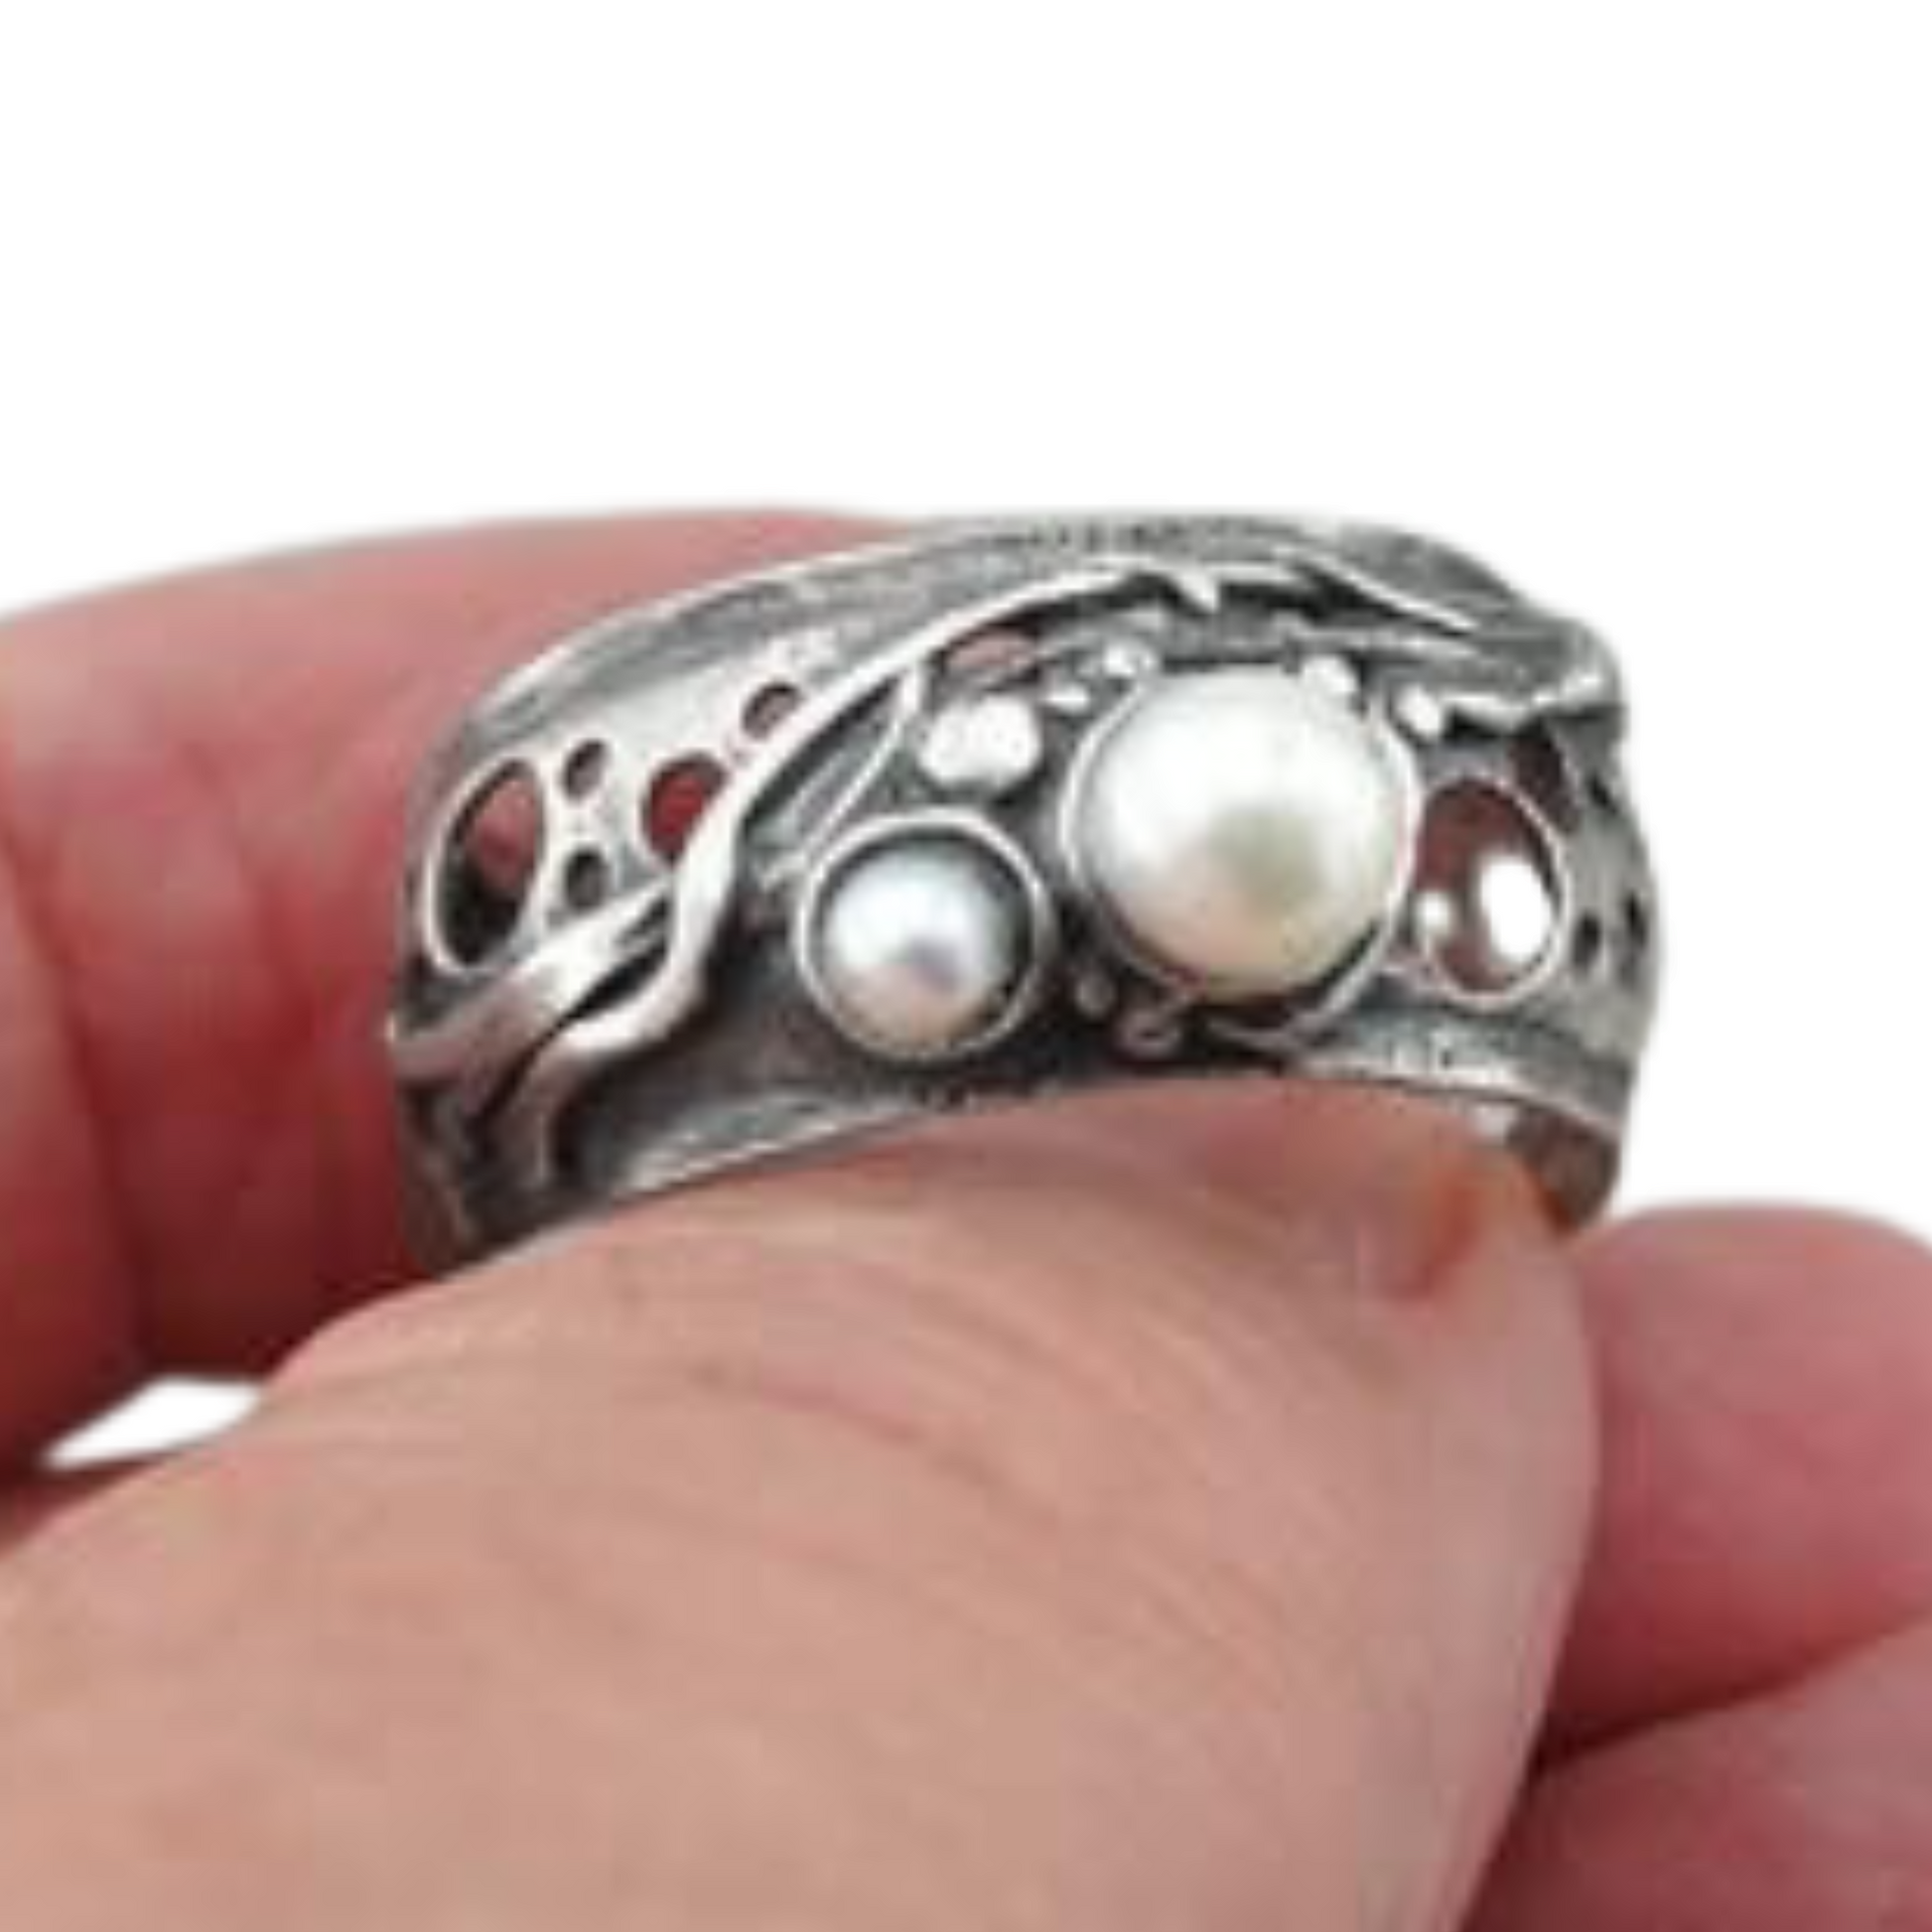 Solid silver ring with genuine natural pearls, Israeli jewelry, Israeli design, wide ring, men ring, unisex ring, pearl ring